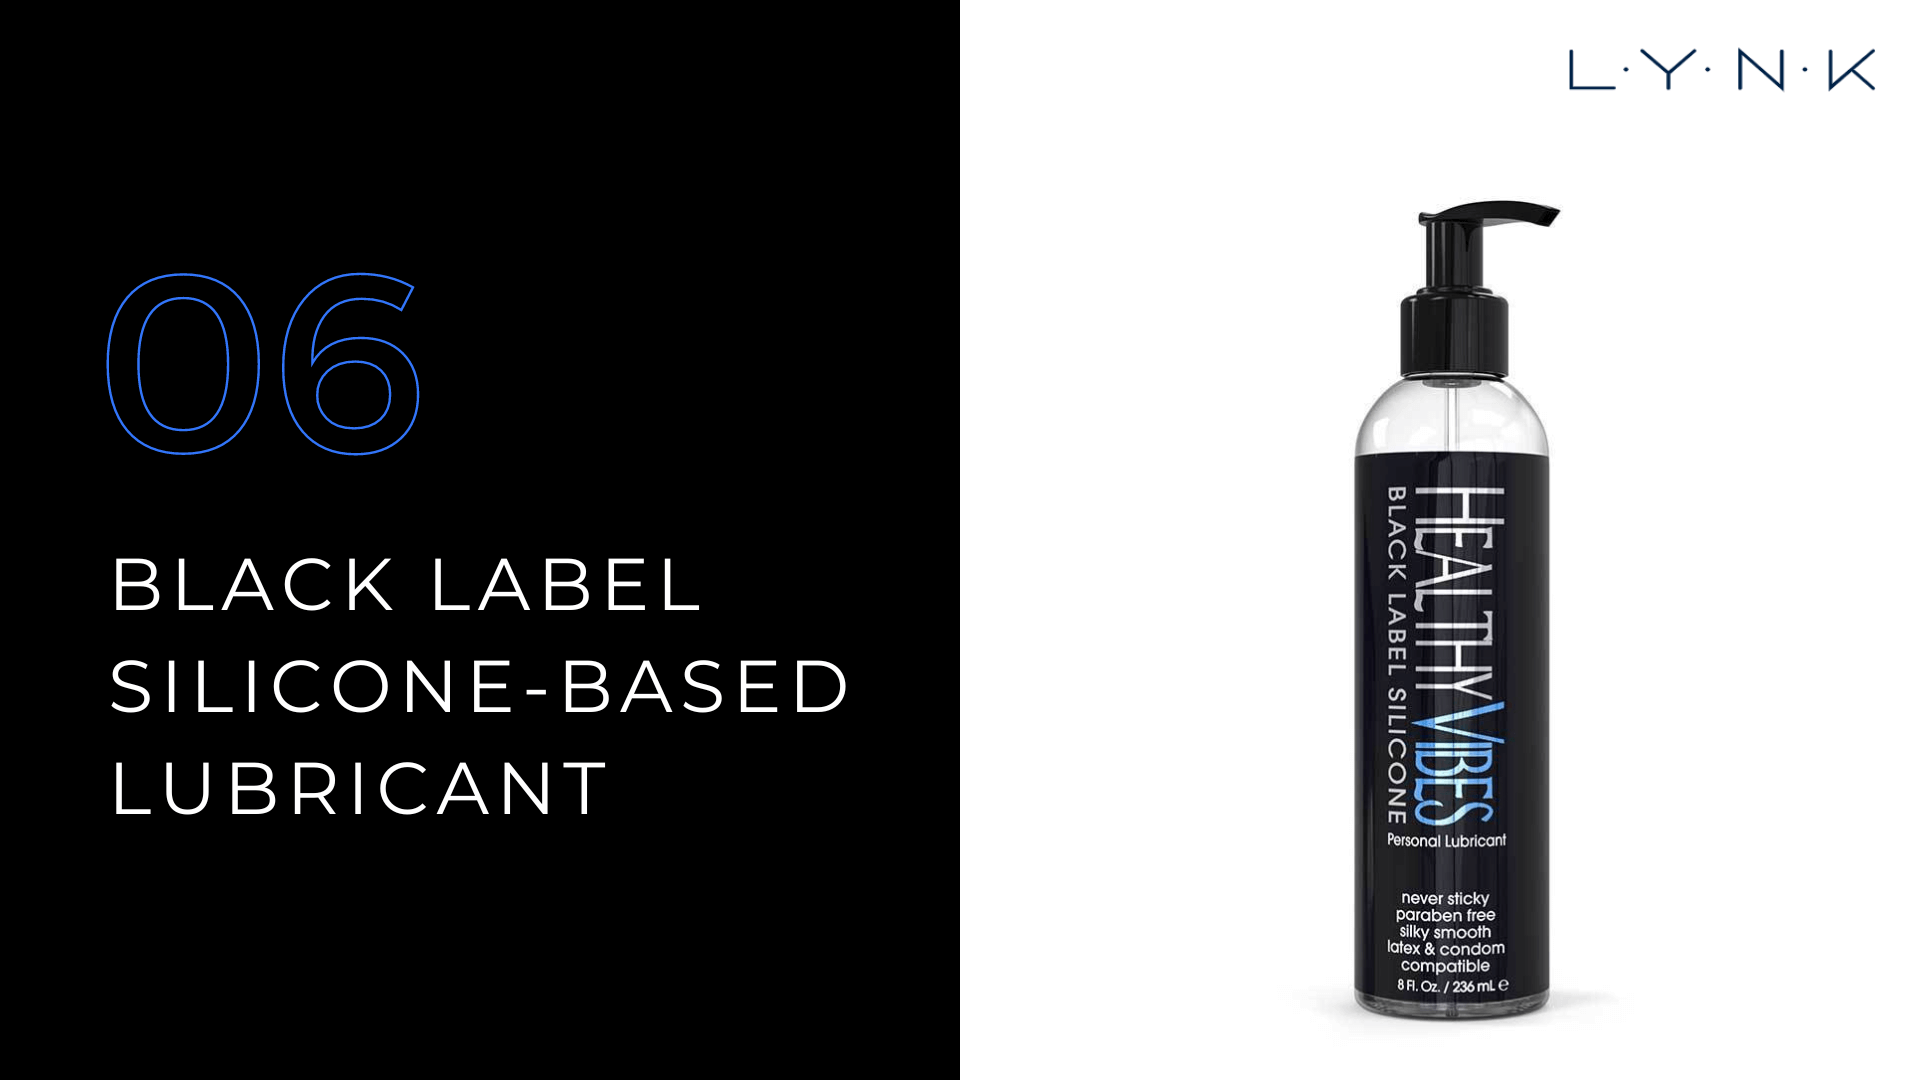 Black Label Silicone-Based Lubricant